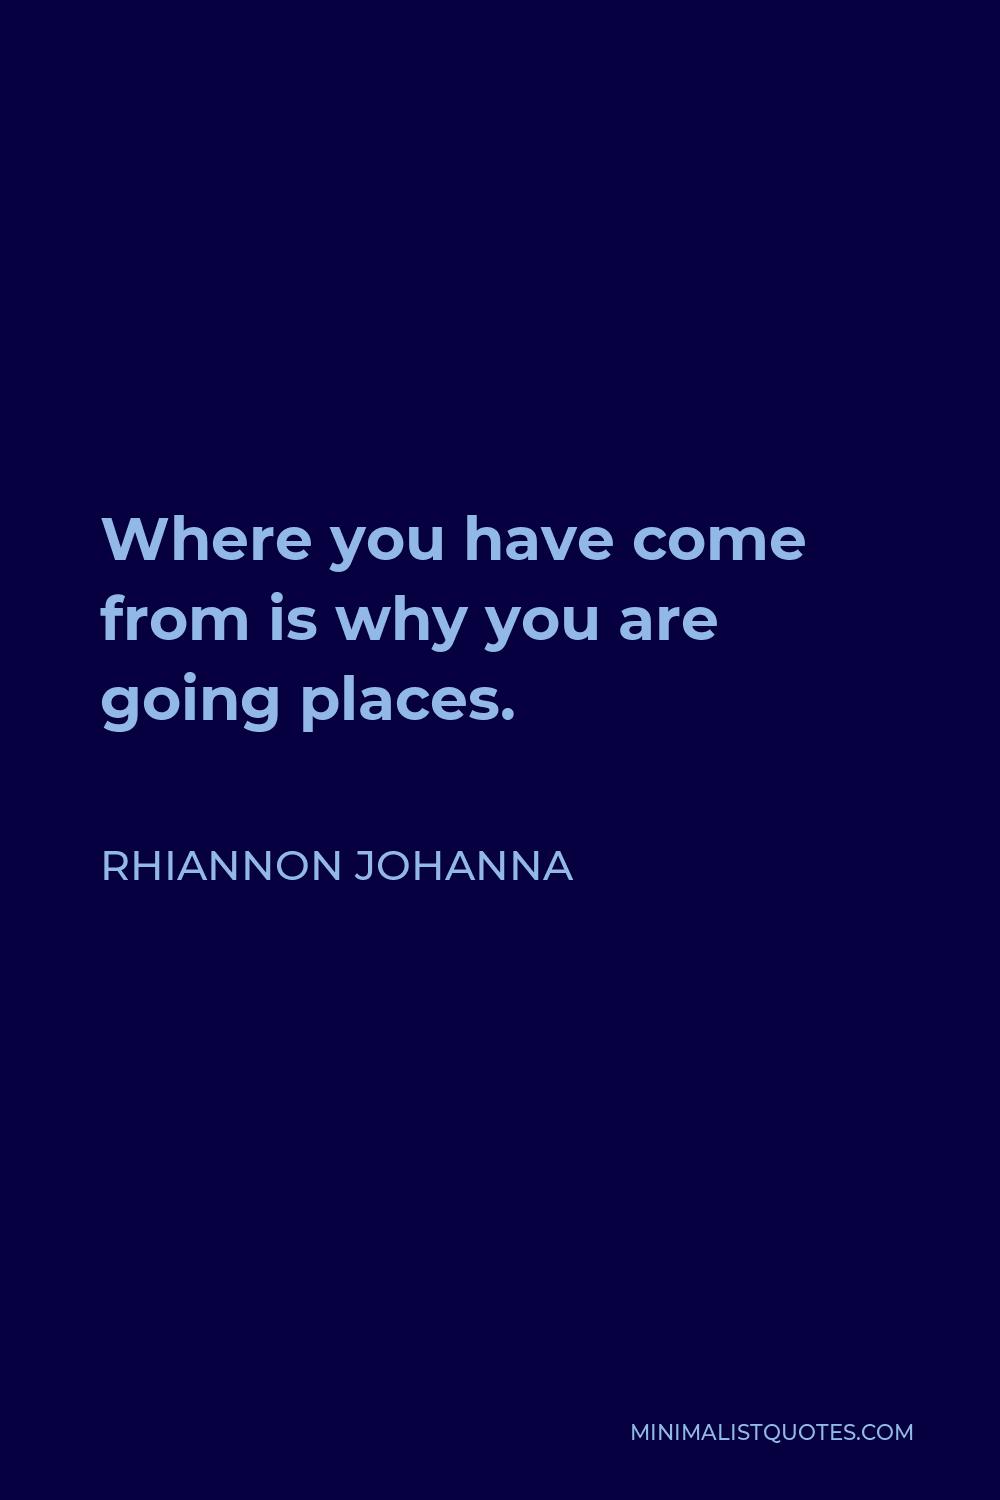 Rhiannon Johanna Quote - Where you have come from is why you are going places.